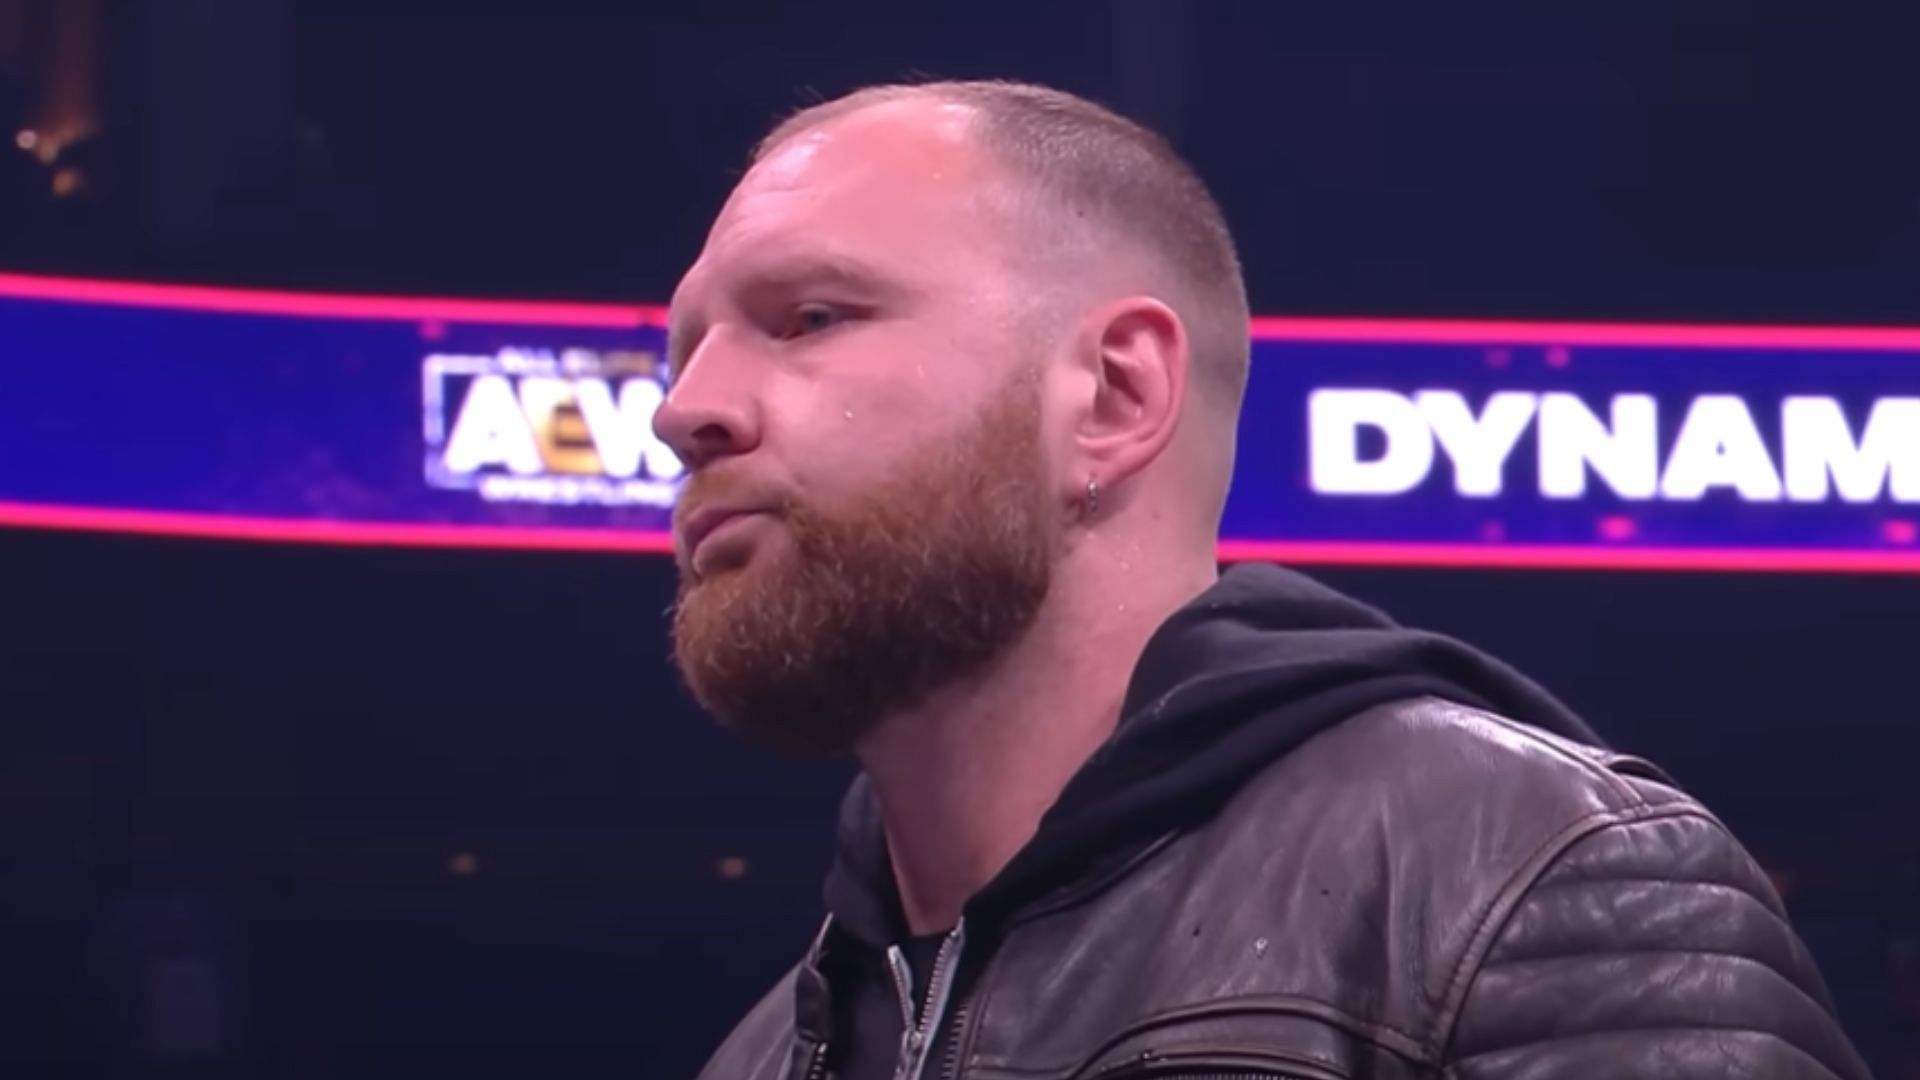 Jon Moxley is a former AEW World Champion [Image Credits: AEW